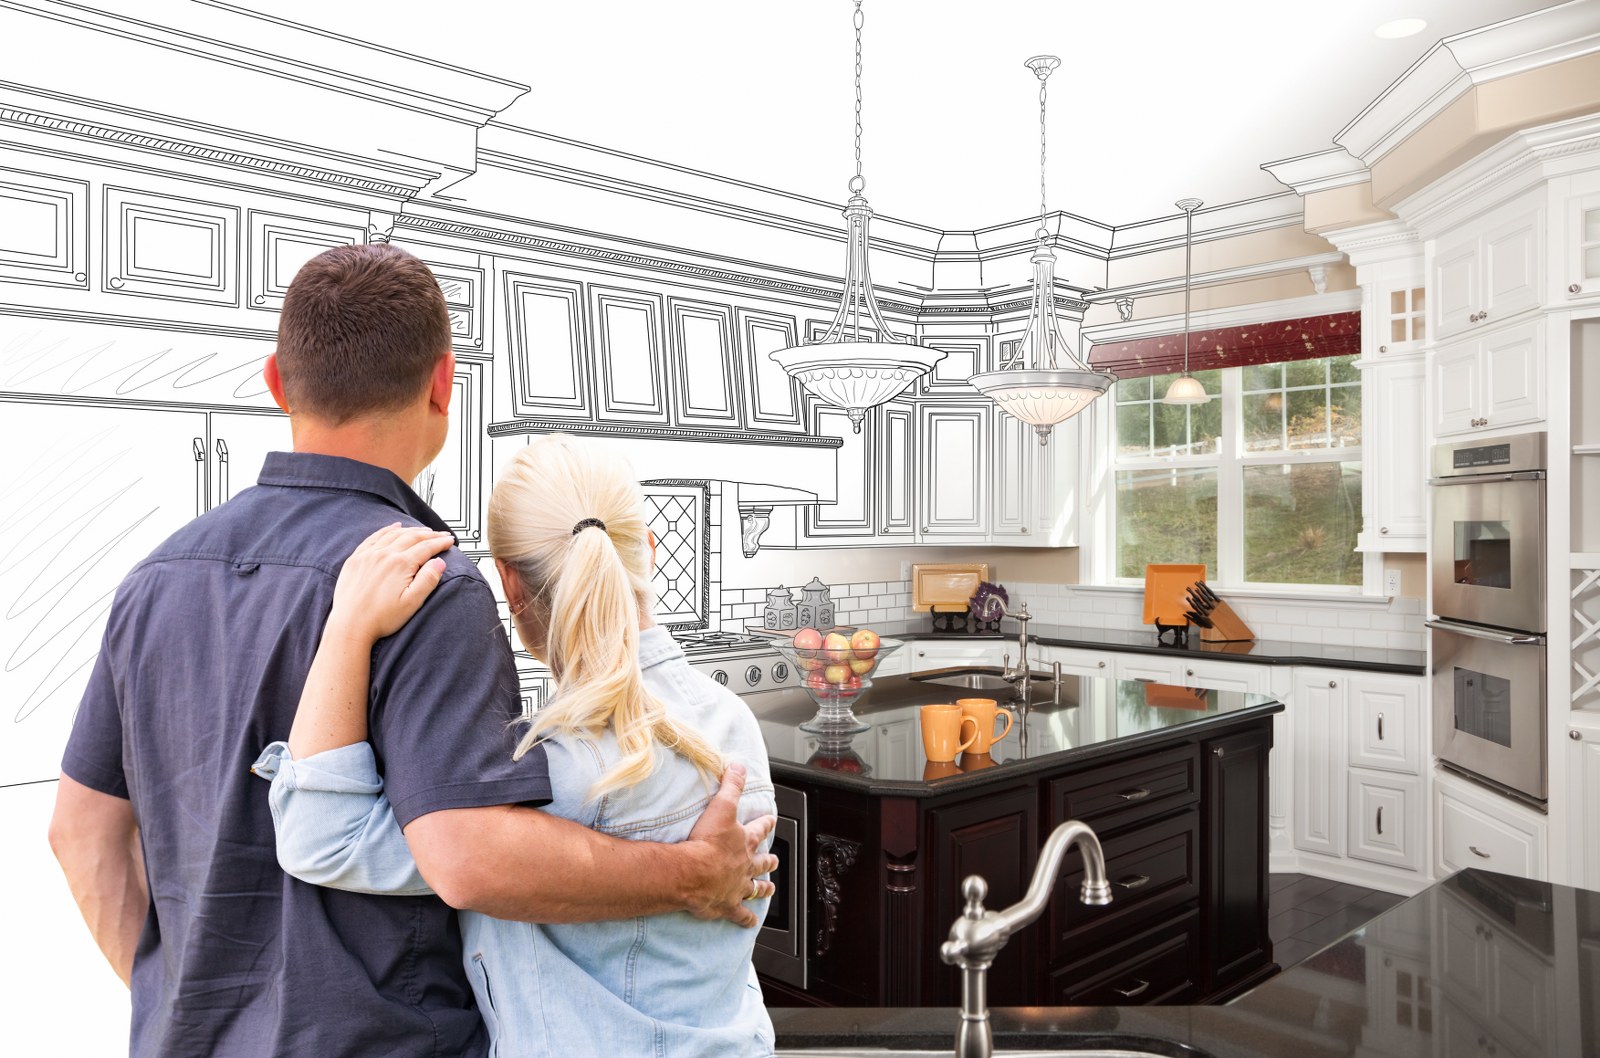 7 Ways To Prepare For A Home Remodeling - The Architects Diary